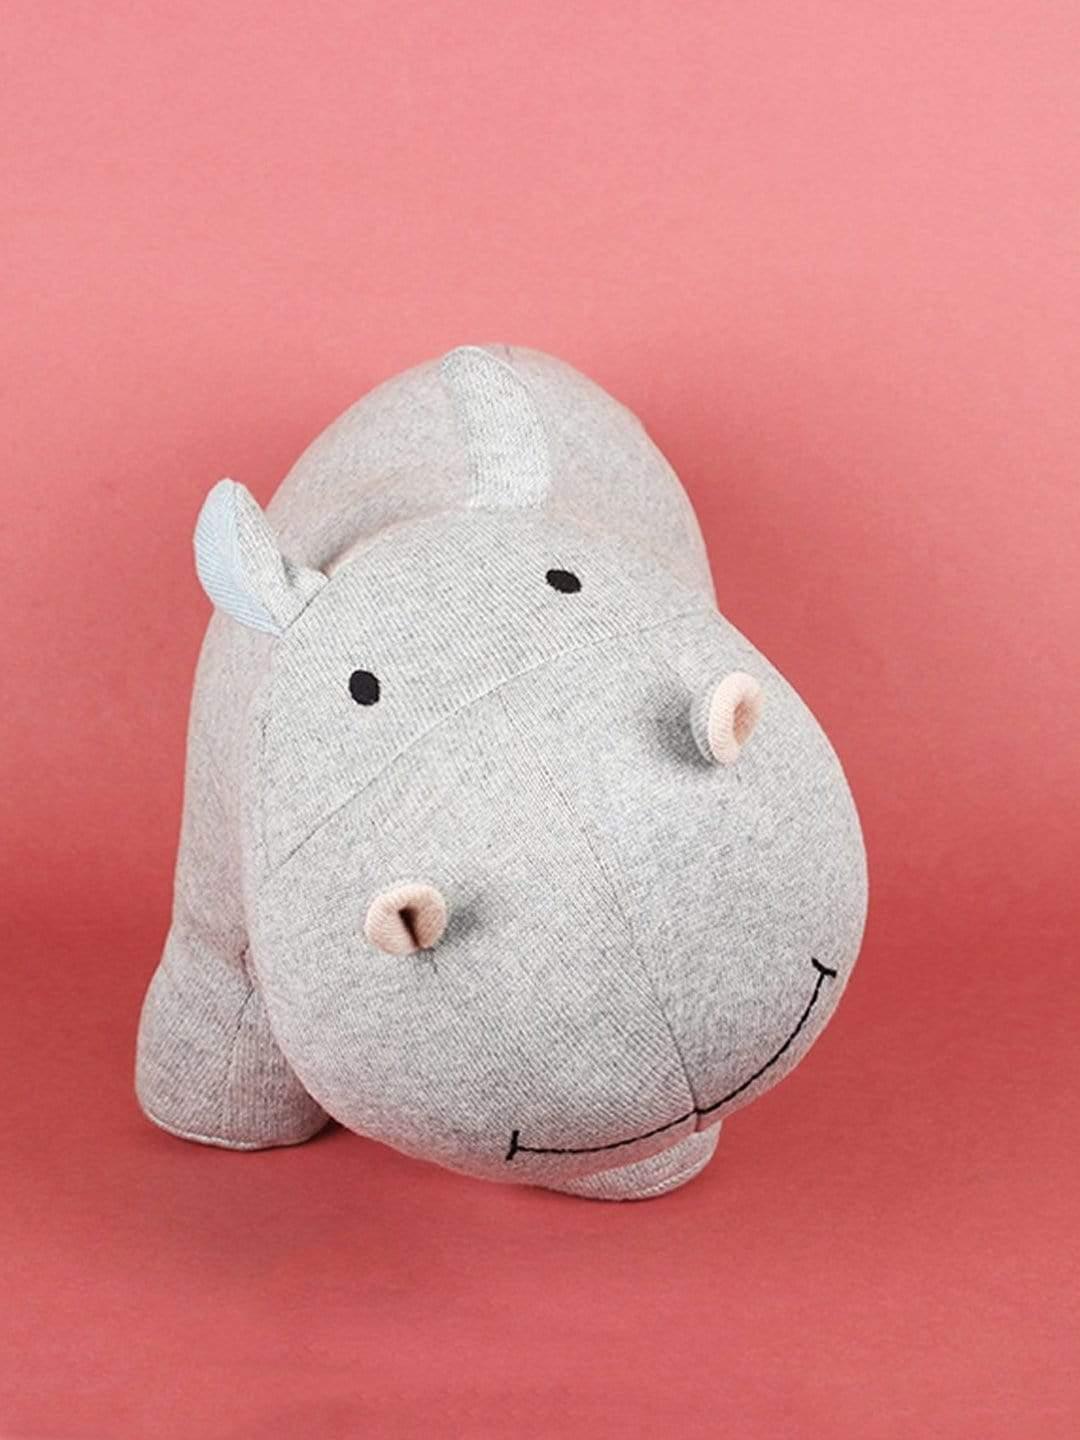 Mr. Hippo Knitted Cotton Shaped Cushion - The Wishing Chair